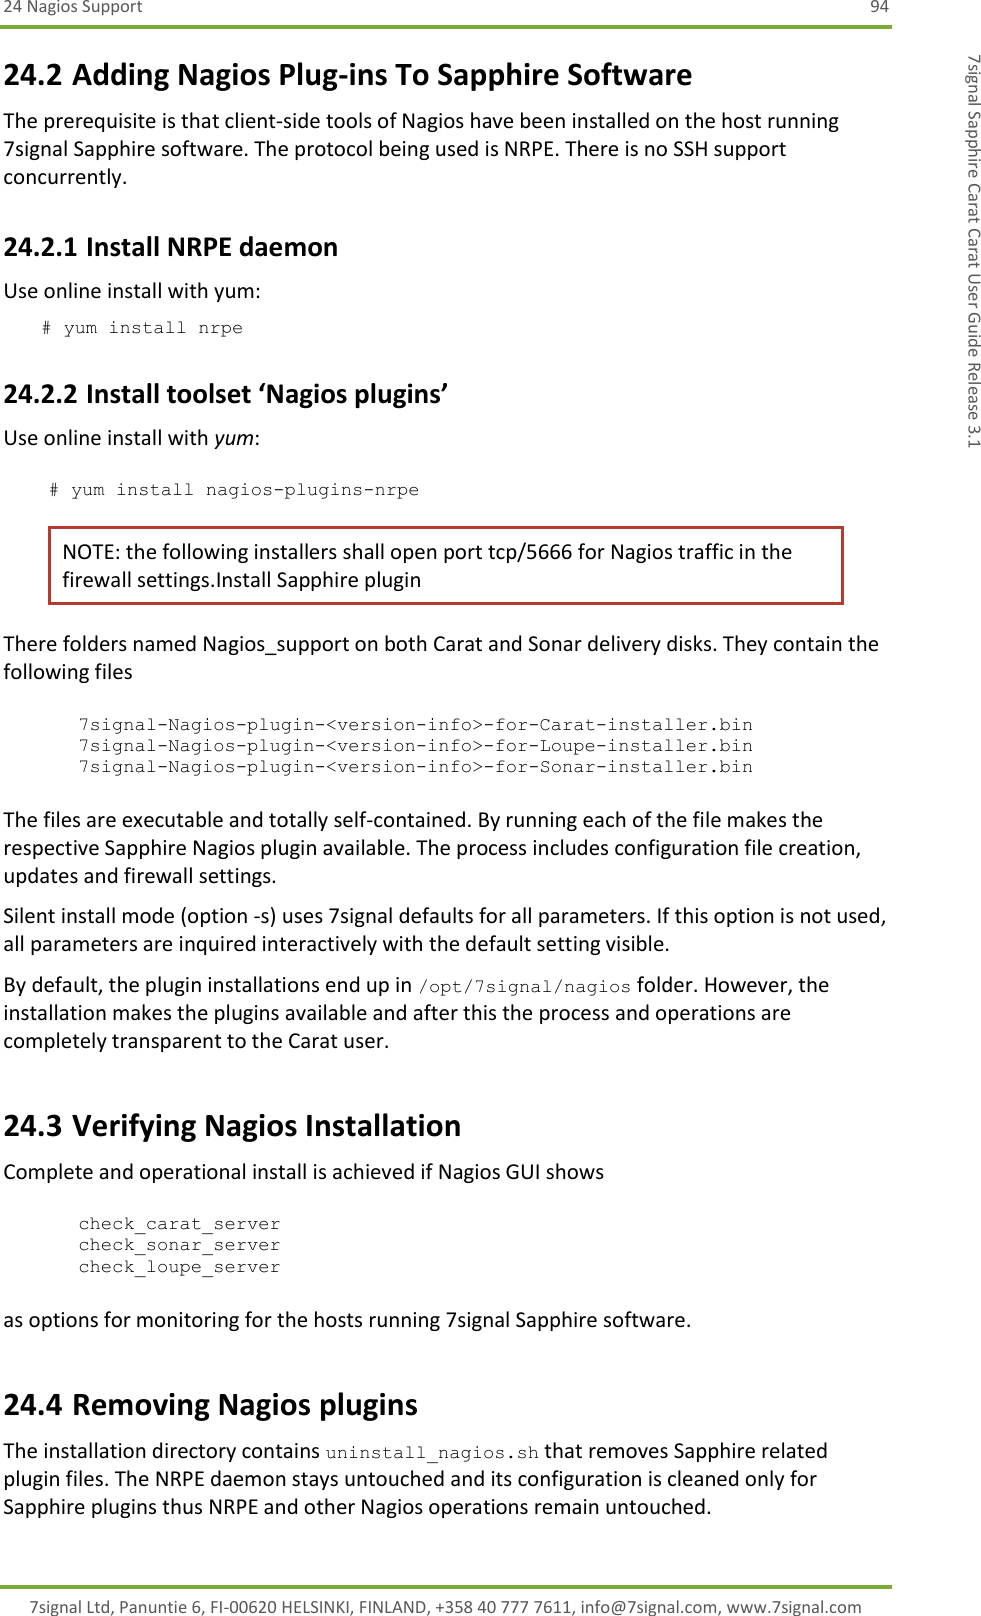 24 Nagios Support  94 7signal Ltd, Panuntie 6, FI-00620 HELSINKI, FINLAND, +358 40 777 7611, info@7signal.com, www.7signal.com 7signal Sapphire Carat Carat User Guide Release 3.1 24.2 Adding Nagios Plug-ins To Sapphire Software The prerequisite is that client-side tools of Nagios have been installed on the host running 7signal Sapphire software. The protocol being used is NRPE. There is no SSH support concurrently. 24.2.1 Install NRPE daemon Use online install with yum: # yum install nrpe 24.2.2 Install toolset ‘Nagios plugins’ Use online install with yum:  # yum install nagios-plugins-nrpe NOTE: the following installers shall open port tcp/5666 for Nagios traffic in the firewall settings.Install Sapphire plugin There folders named Nagios_support on both Carat and Sonar delivery disks. They contain the following files  7signal-Nagios-plugin-&lt;version-info&gt;-for-Carat-installer.bin 7signal-Nagios-plugin-&lt;version-info&gt;-for-Loupe-installer.bin 7signal-Nagios-plugin-&lt;version-info&gt;-for-Sonar-installer.bin  The files are executable and totally self-contained. By running each of the file makes the respective Sapphire Nagios plugin available. The process includes configuration file creation, updates and firewall settings. Silent install mode (option -s) uses 7signal defaults for all parameters. If this option is not used, all parameters are inquired interactively with the default setting visible. By default, the plugin installations end up in /opt/7signal/nagios folder. However, the installation makes the plugins available and after this the process and operations are completely transparent to the Carat user.  24.3 Verifying Nagios Installation  Complete and operational install is achieved if Nagios GUI shows  check_carat_server check_sonar_server check_loupe_server  as options for monitoring for the hosts running 7signal Sapphire software. 24.4 Removing Nagios plugins The installation directory contains uninstall_nagios.sh that removes Sapphire related plugin files. The NRPE daemon stays untouched and its configuration is cleaned only for Sapphire plugins thus NRPE and other Nagios operations remain untouched. 